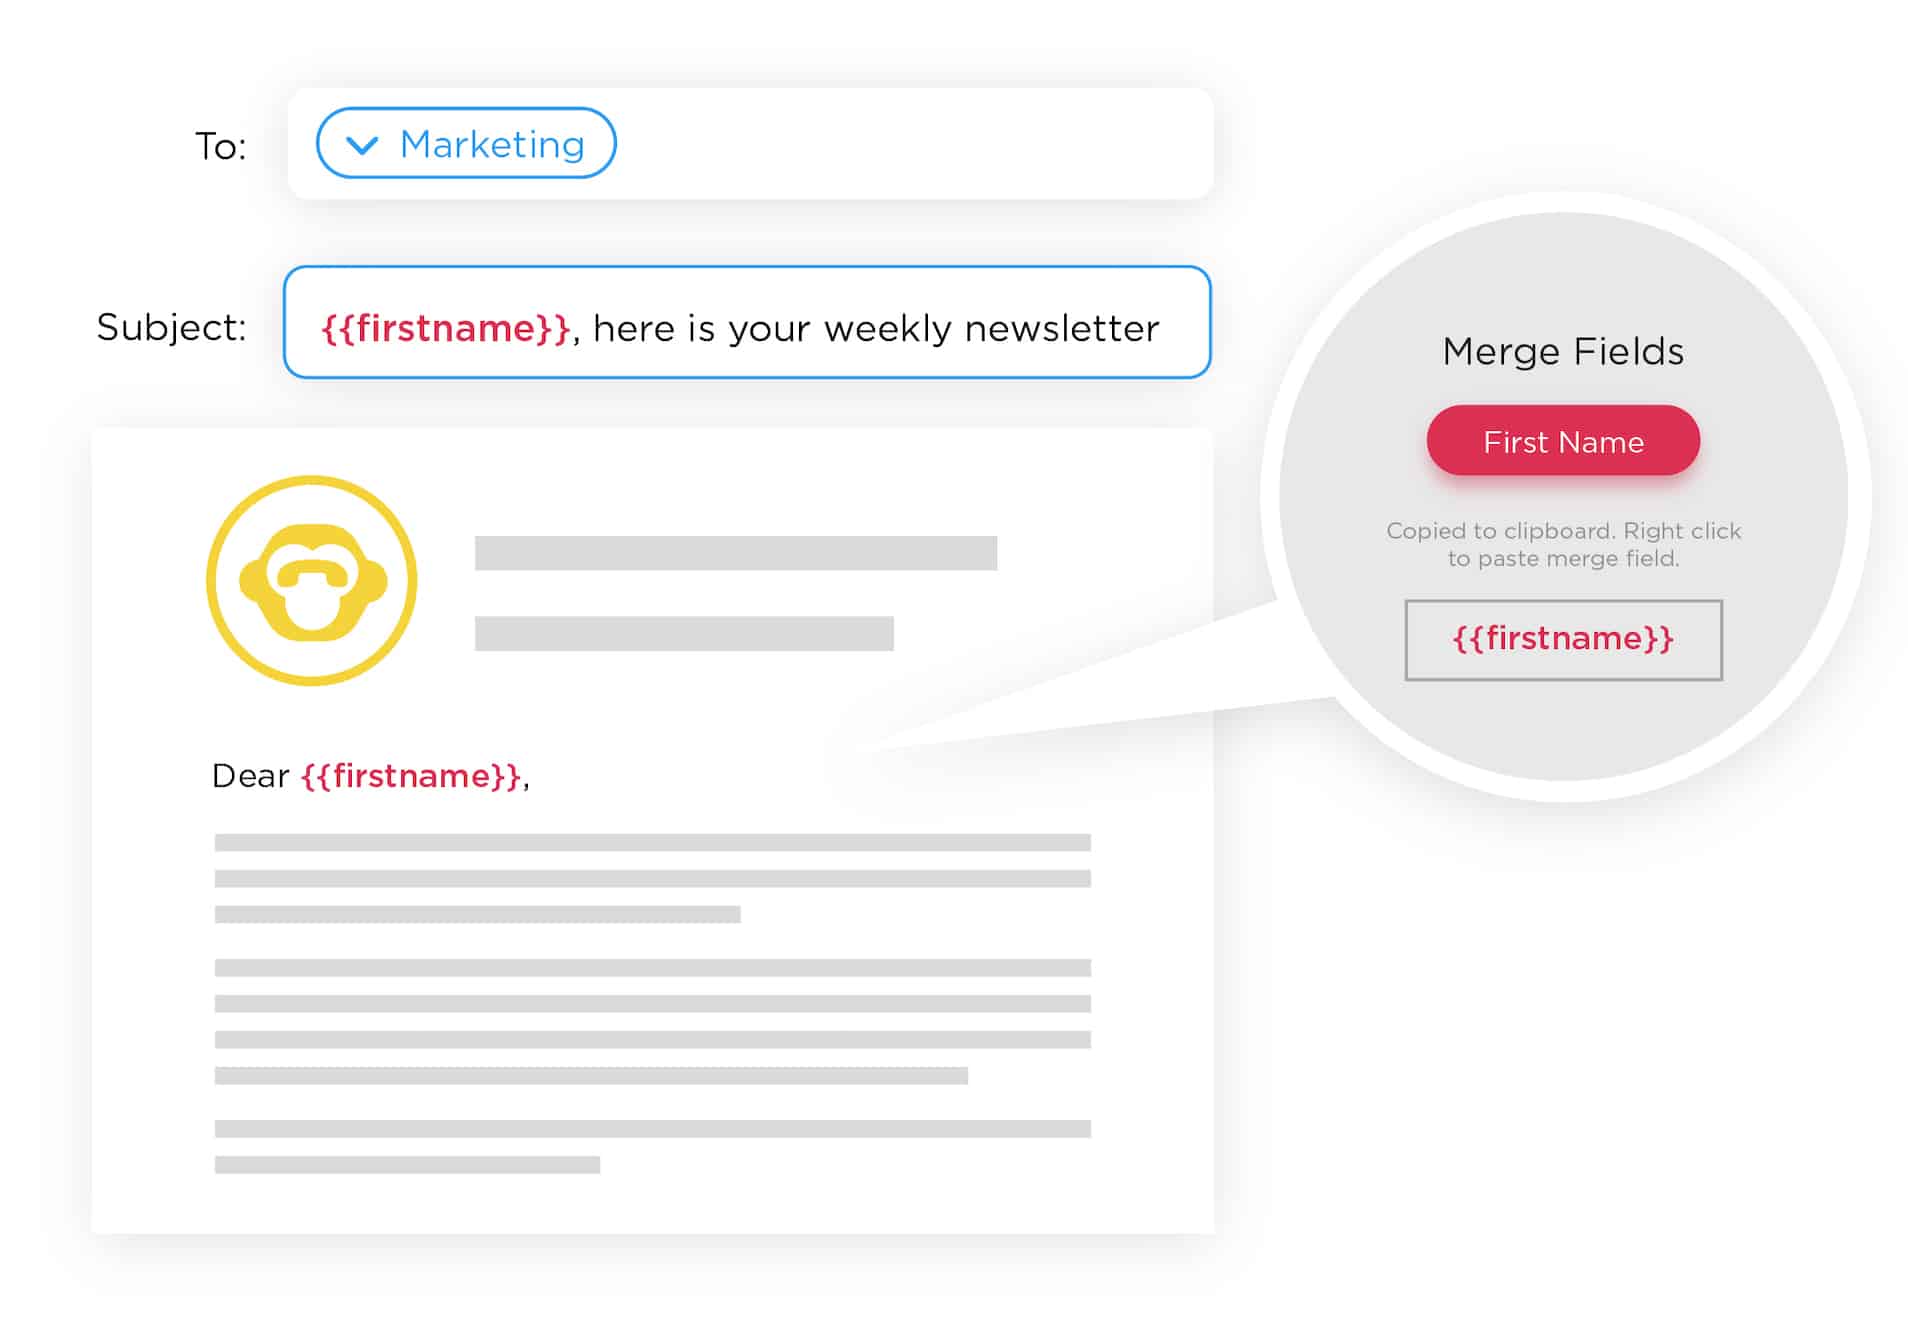 ContactMonkey's merge tags allow you to add personalized subject lines and body copy to your employee emails.